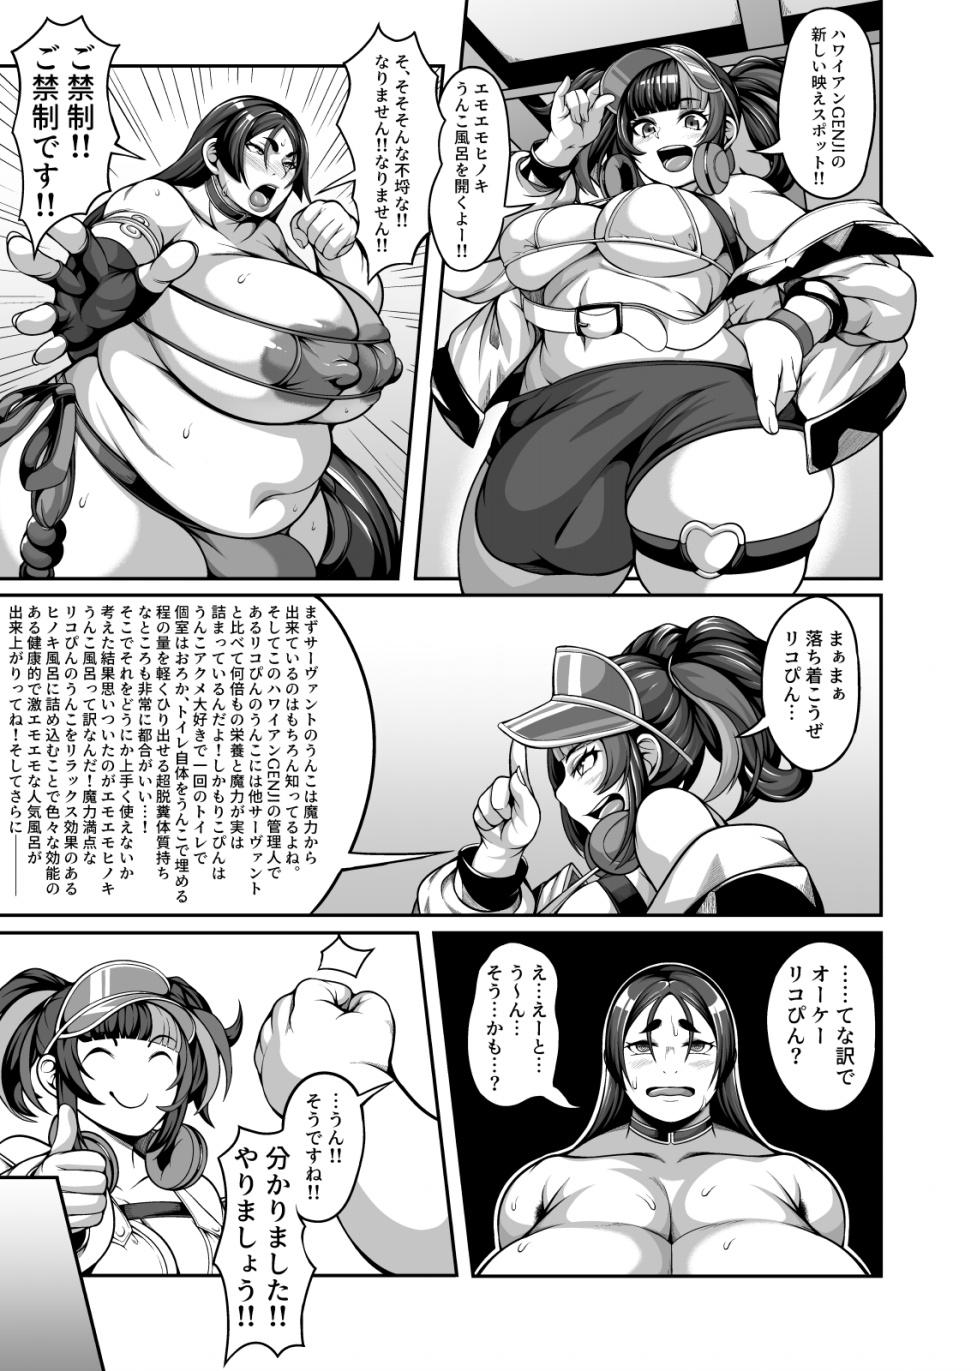 Step Mom Raikou Maman VS VOL.1 - Fate grand order Clothed Sex - Page 11